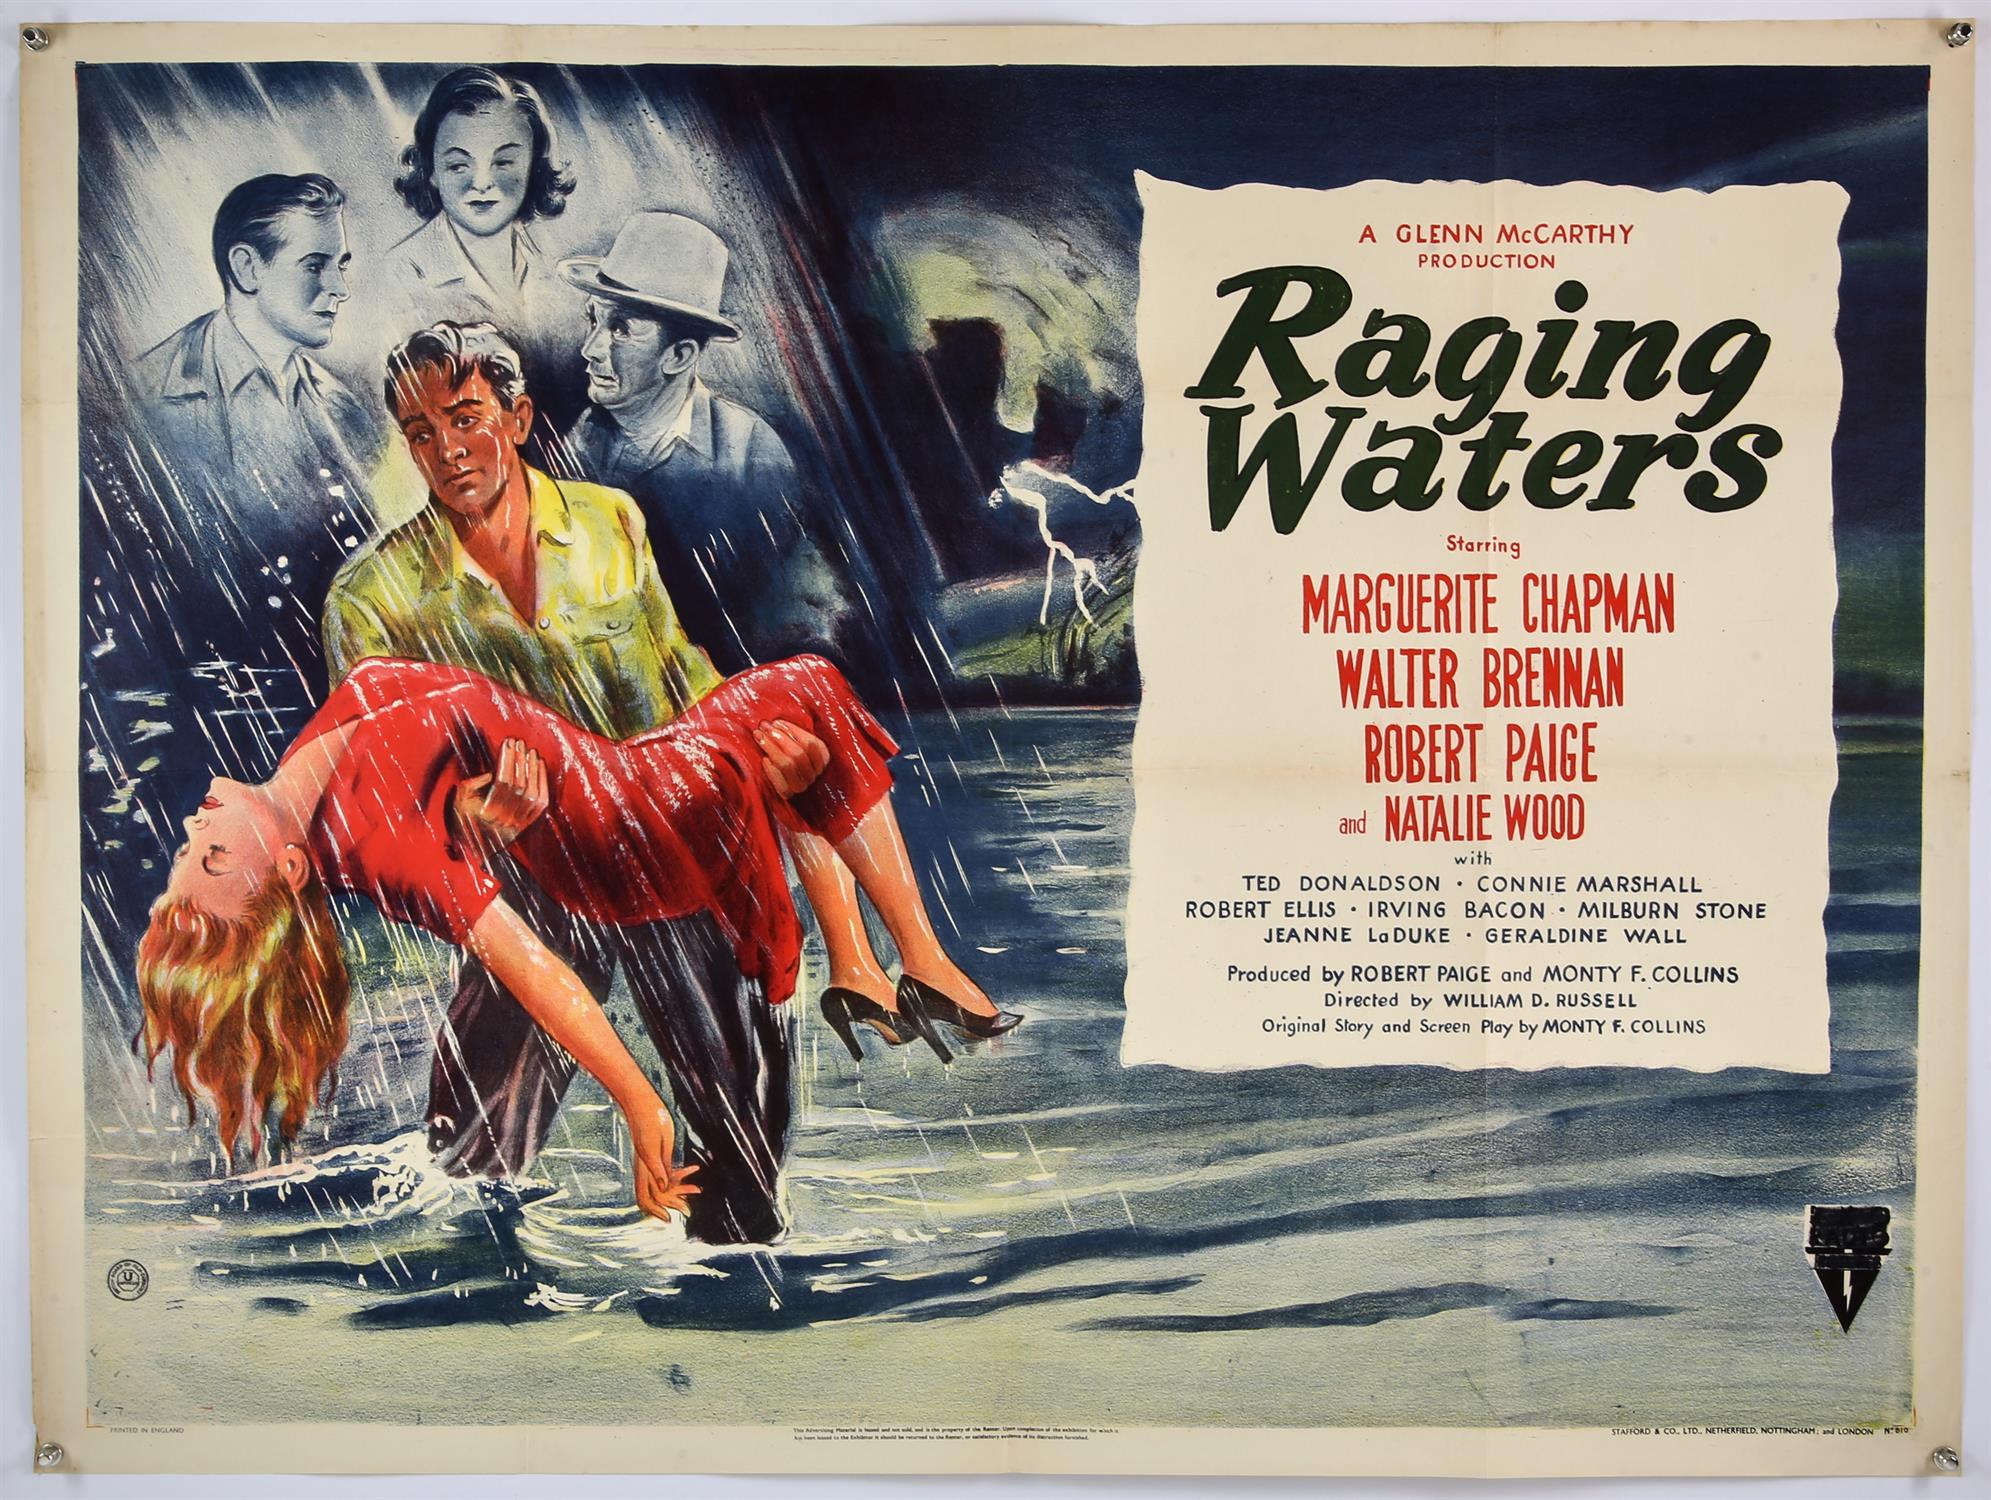 Raging Waters (1948) British Quad film poster for the drama otherwise known as “The Green Promise”